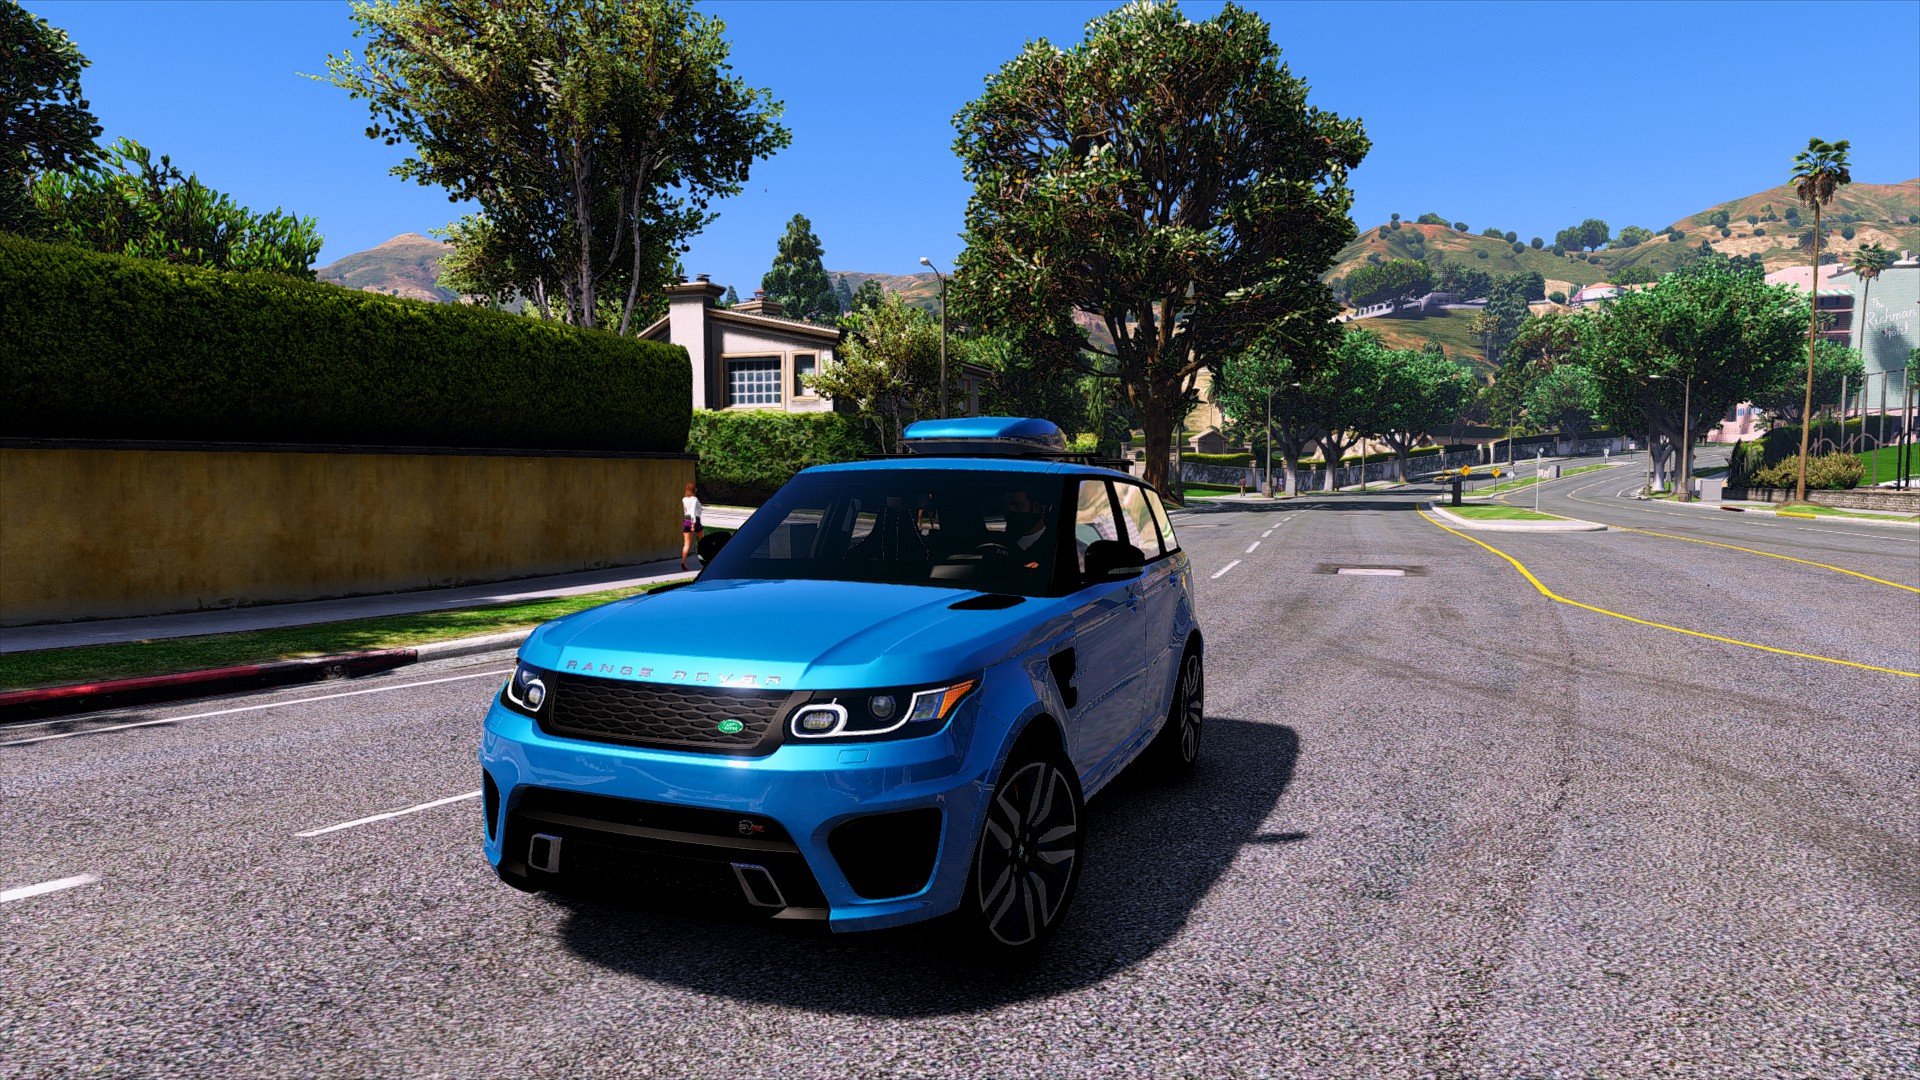 Land rover in gta 5 фото 86